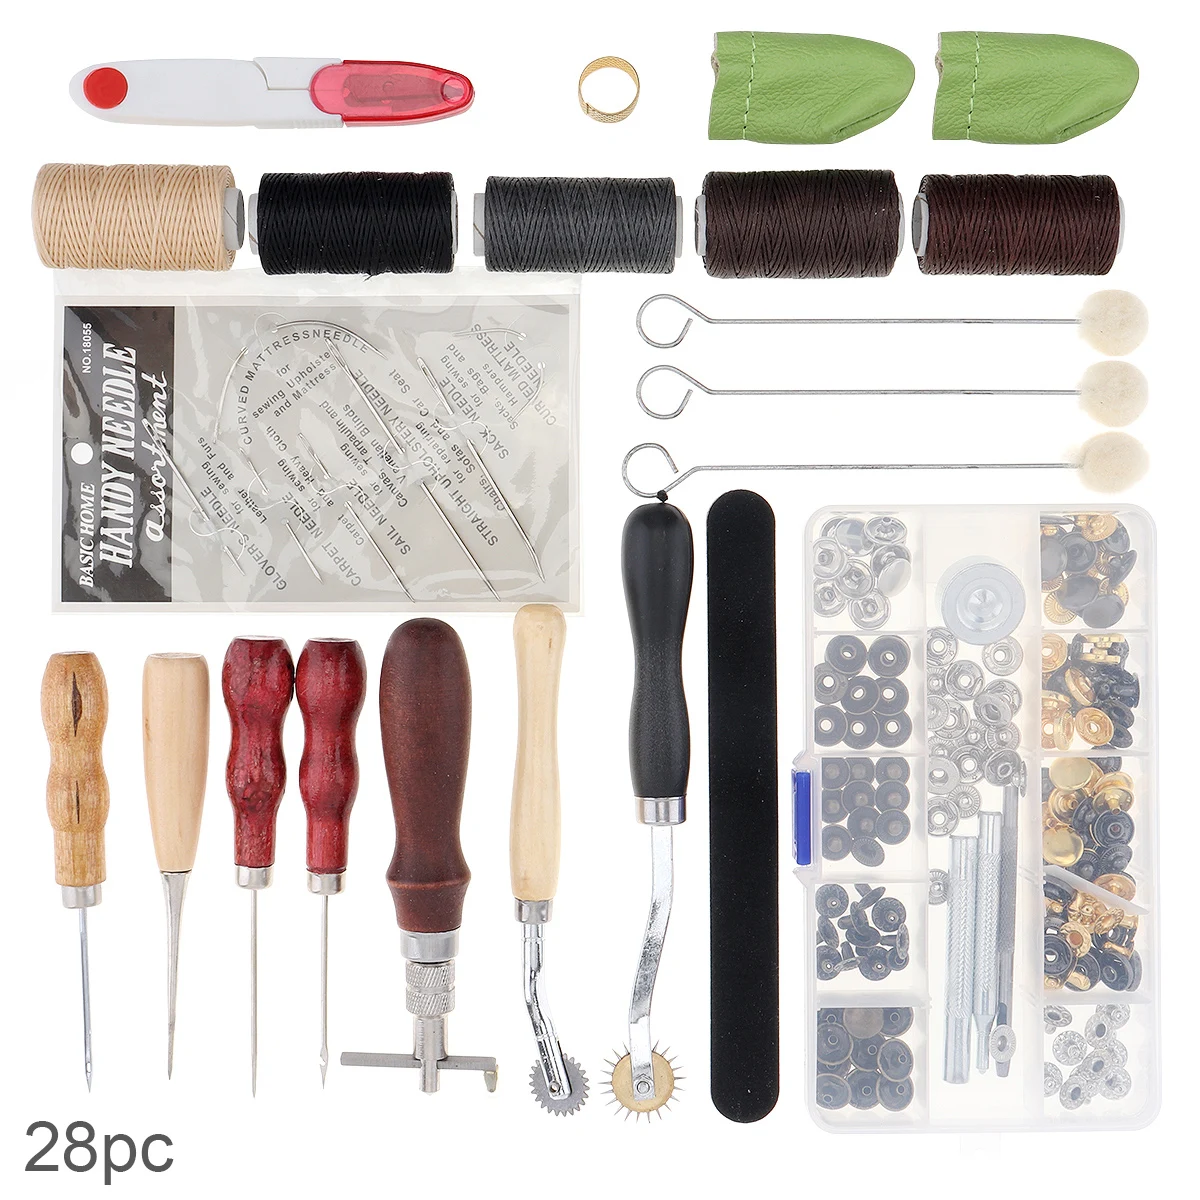 

28pcs/set DIY Leather Craft Handmade Sewing Stitching Punch Carving Work Kit Saddle Groover Waxed Thimble Kit Practical for DIY